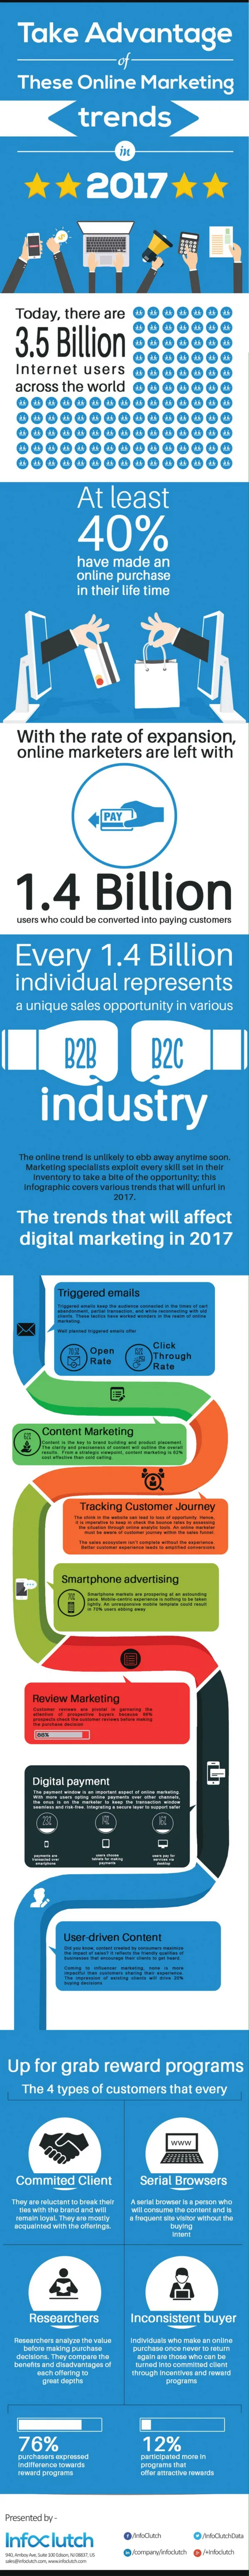 Take advantage of these online marketing trends in 2017